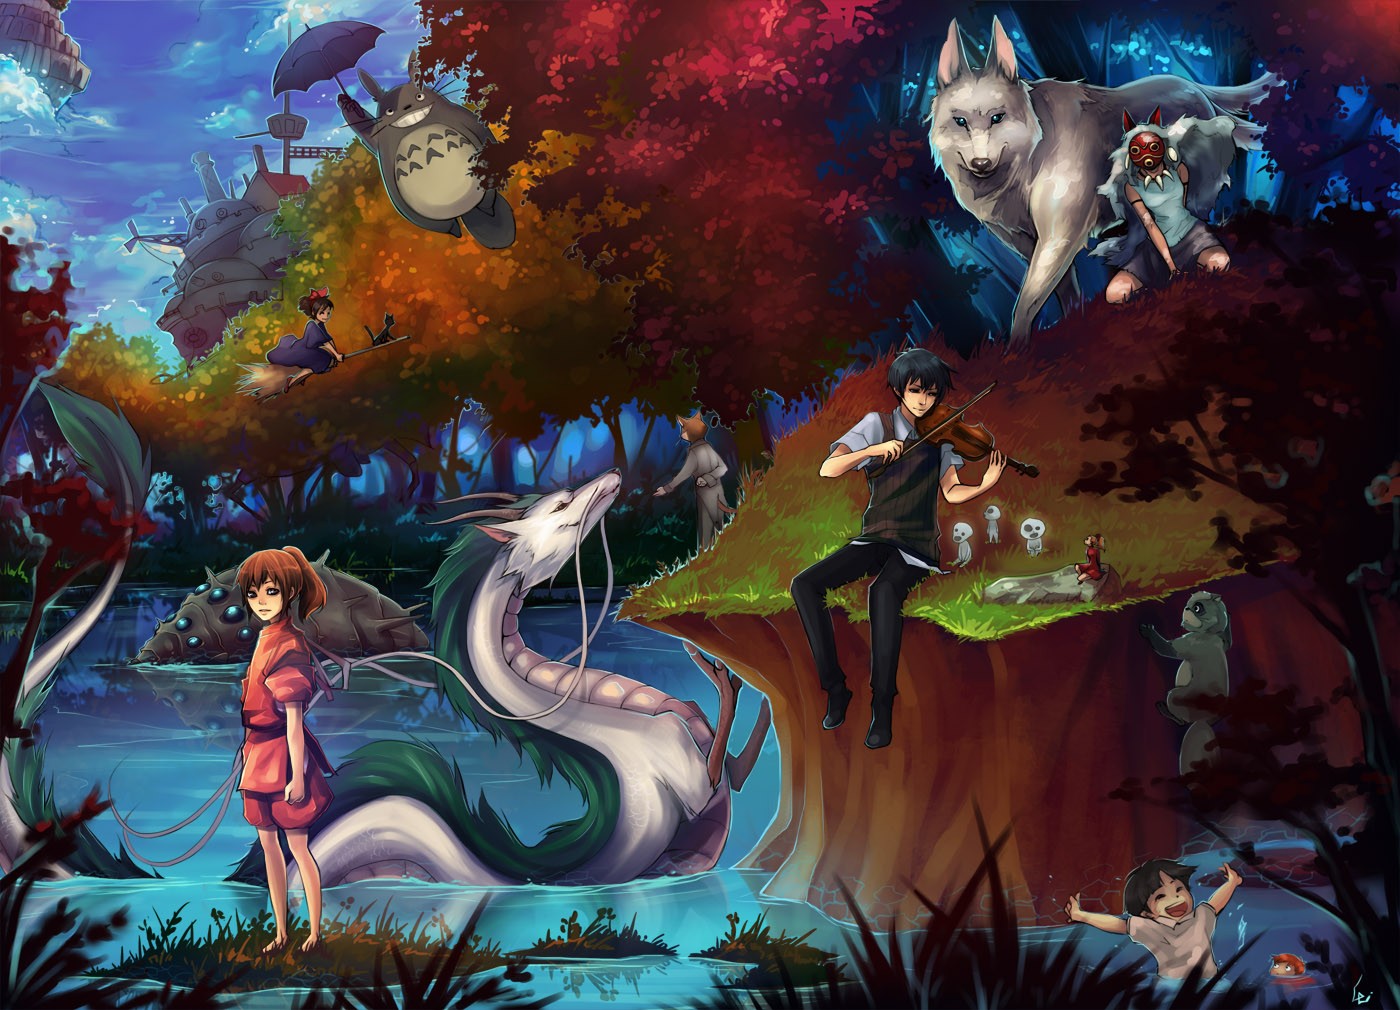 Studio Ghibli, Spirited Away, My Neighbor Totoro, Totoro, Princess Mononoke, Howls Moving Castle, Castle In The Sky, Ponyo, Arrietty, Kikis Delivery Service, Nausicaa Of The Valley Of The Wind Wallpaper